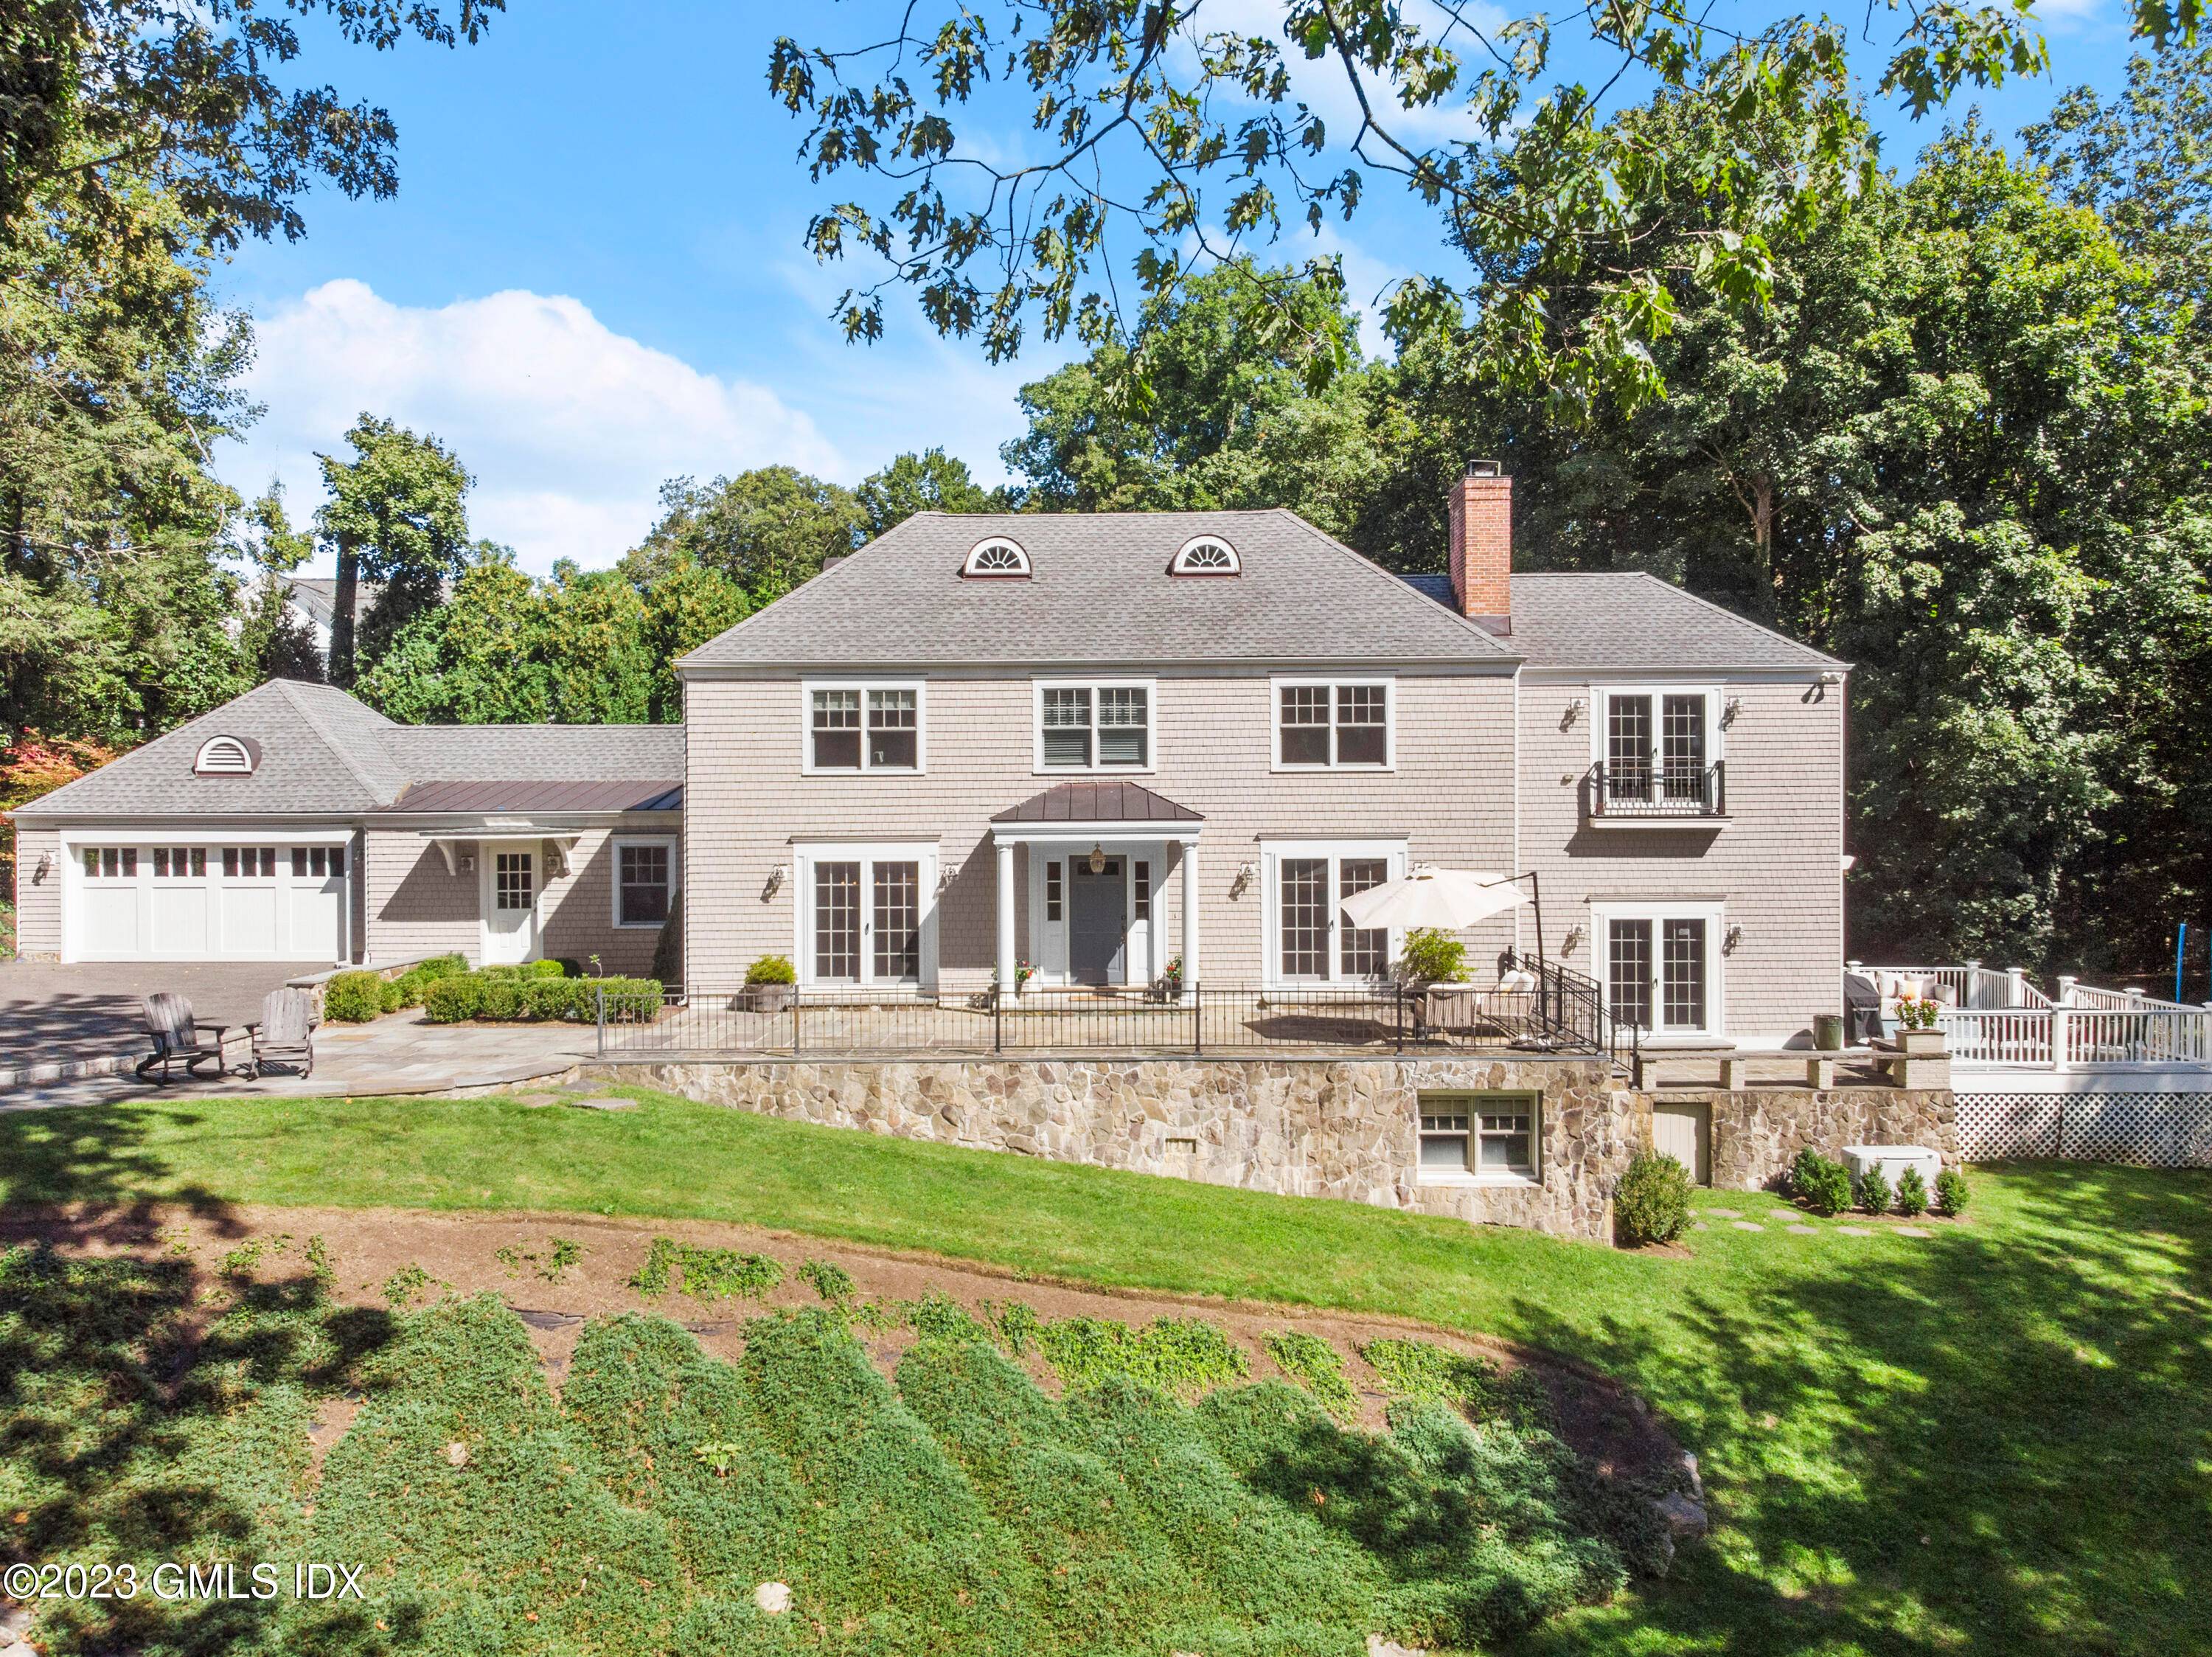 Welcome to this stunning, fully renovated, 5 bedroom, 4 1 2 bath colonial style house nestled on a peaceful cul de sac.